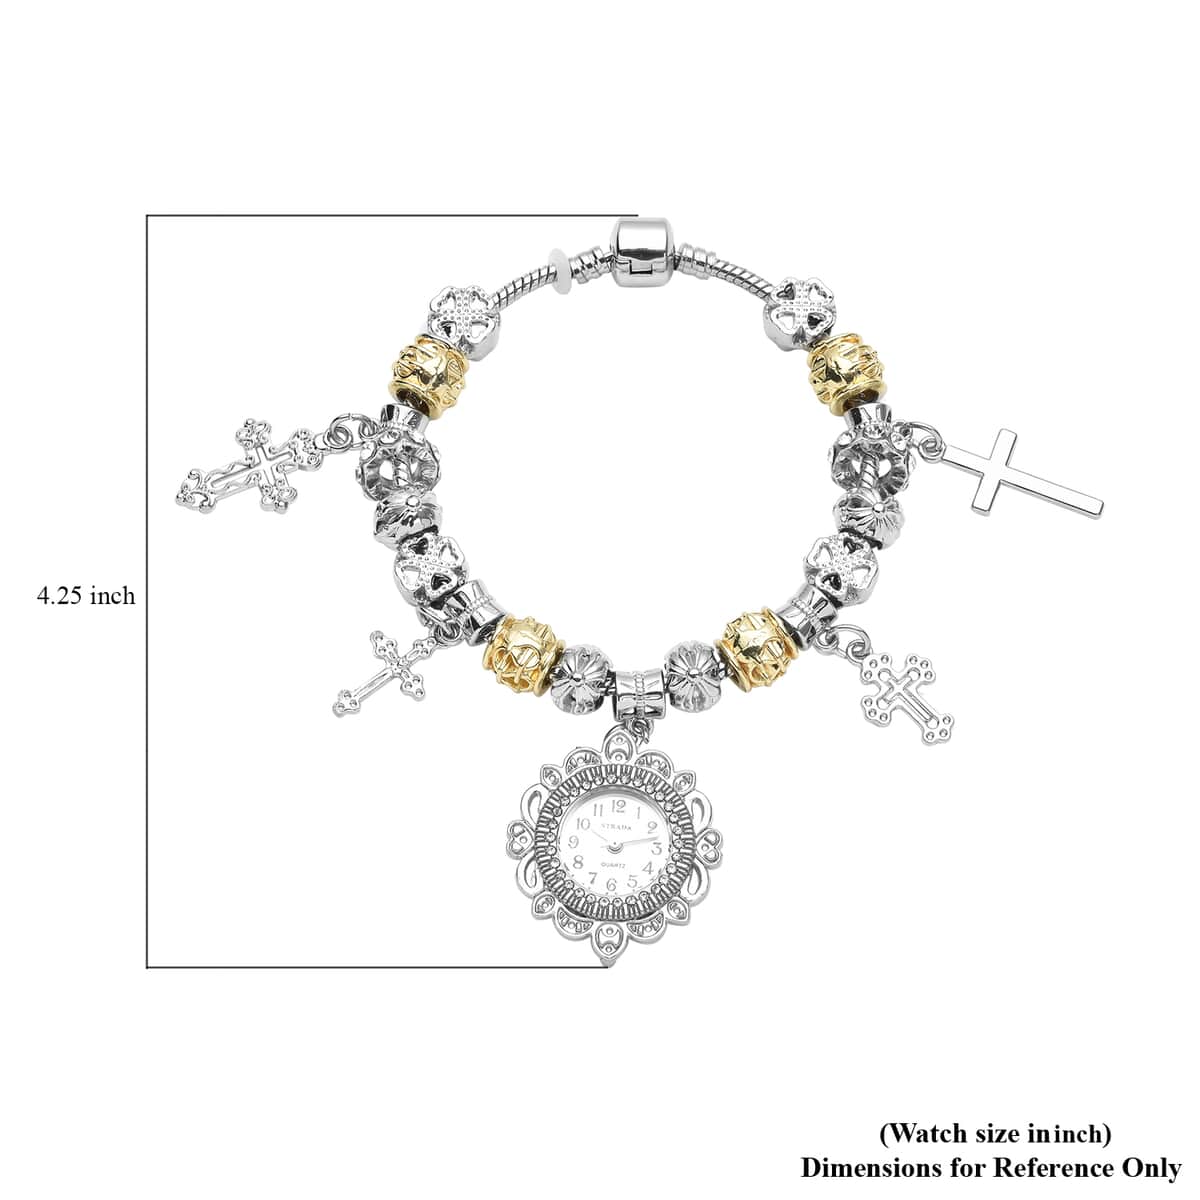 Strada Austrian Crystal Japanese Movement Cross Charms Bracelet Watch in Silvertone and Goldtone image number 5